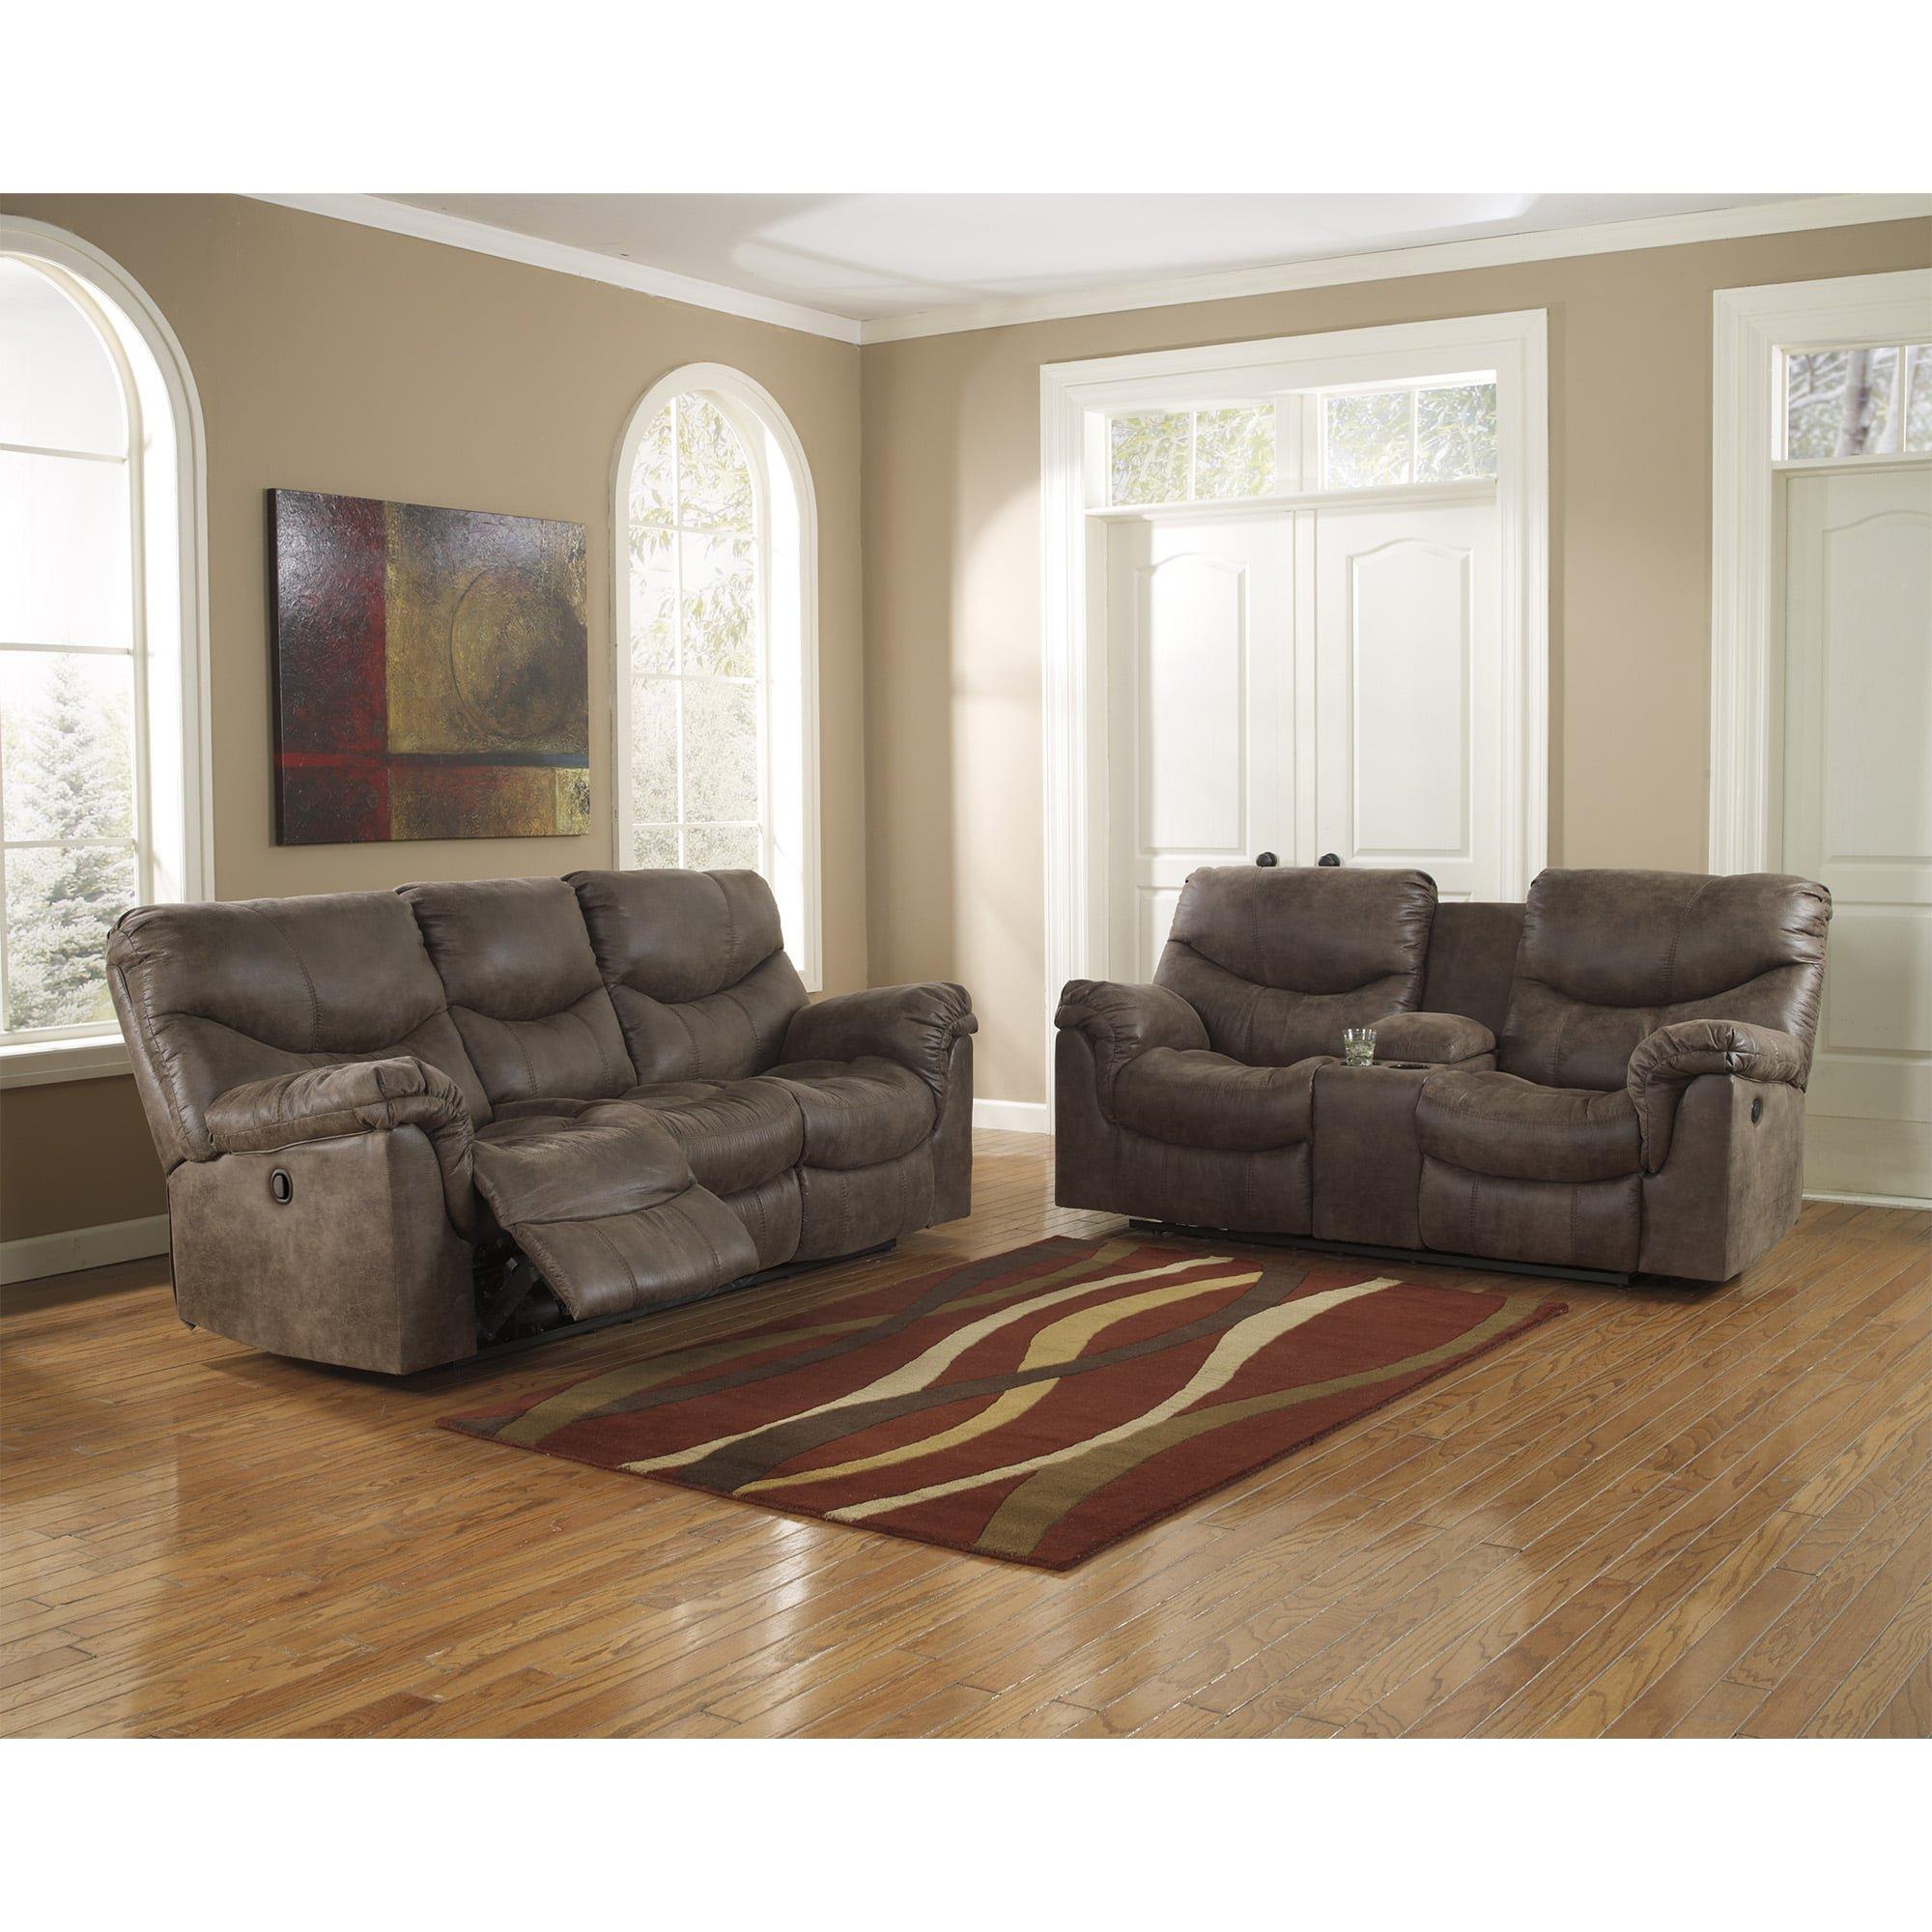 Rent To Own Ashley 2 Piece Alzena Living Room Collection At Aarons Today